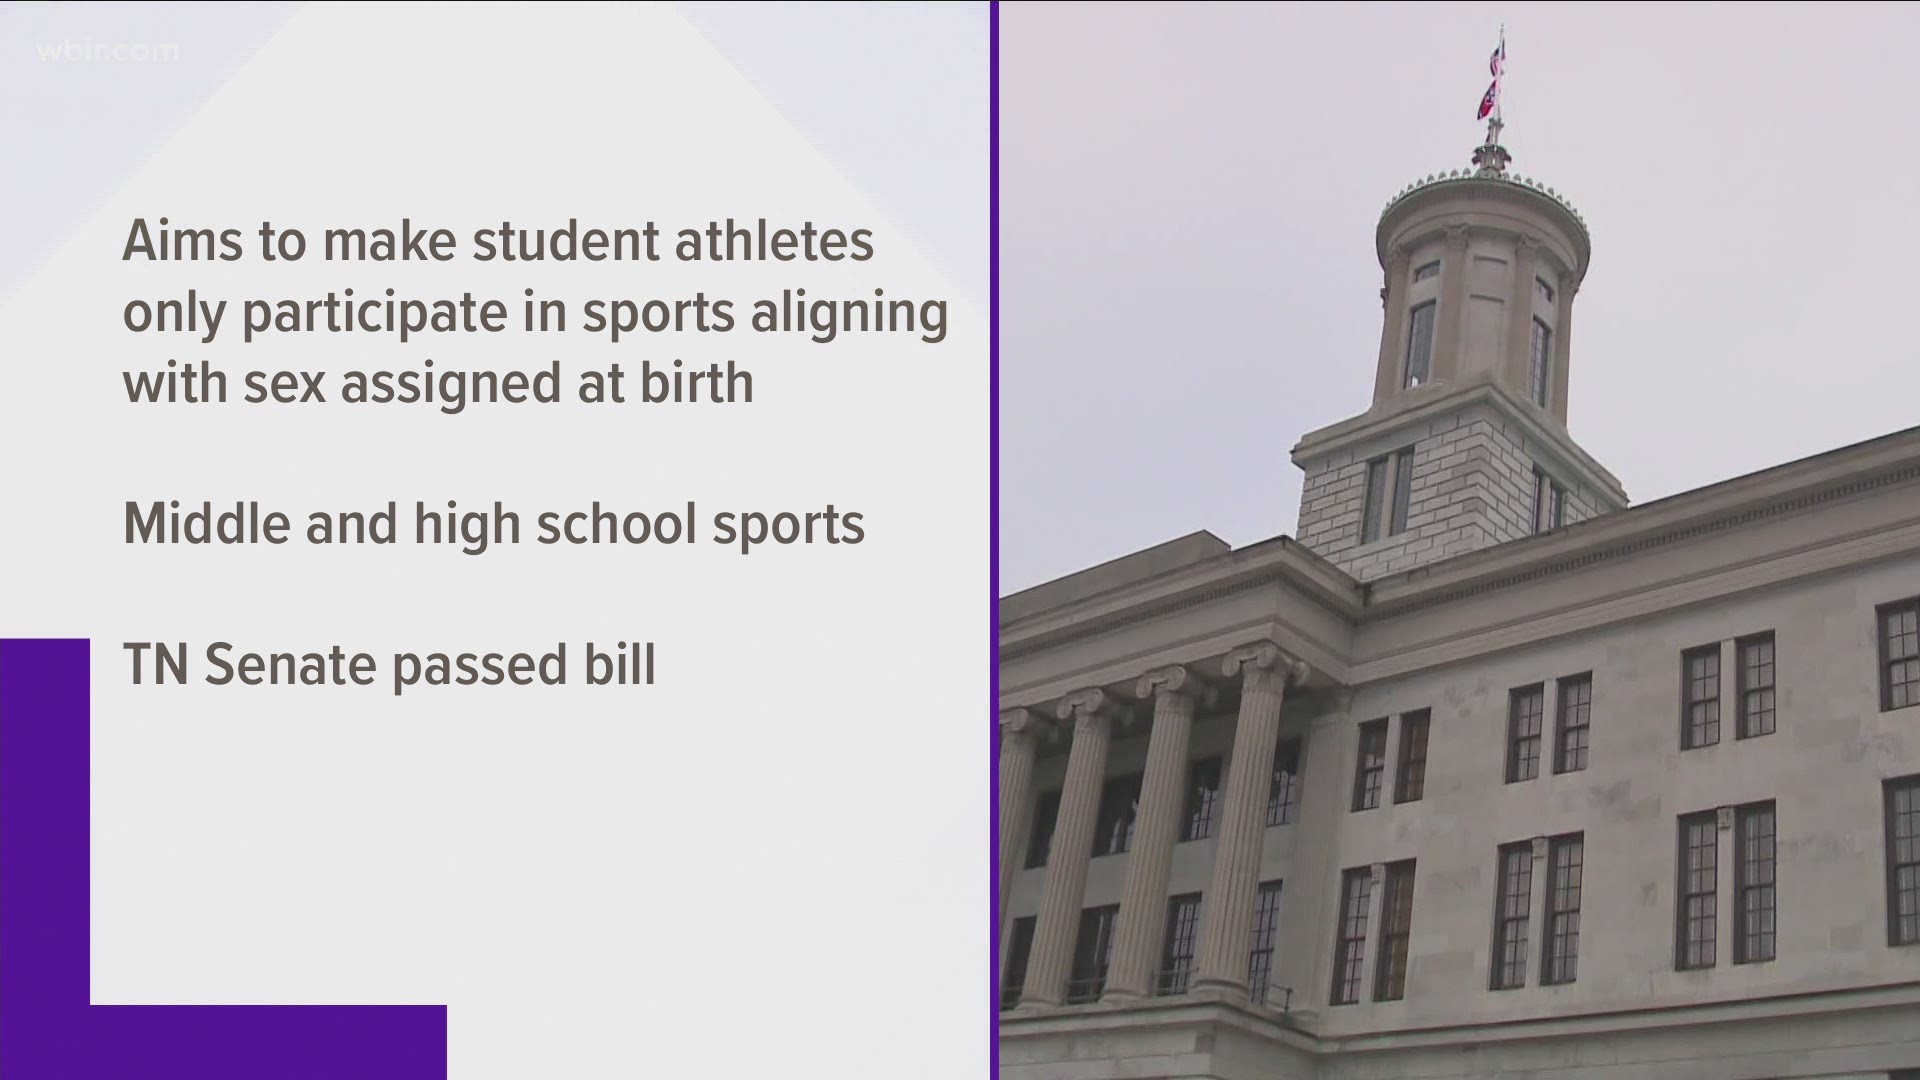 The bill states the student-athletes can only compete in sports or other events under the gender they were assigned at birth.